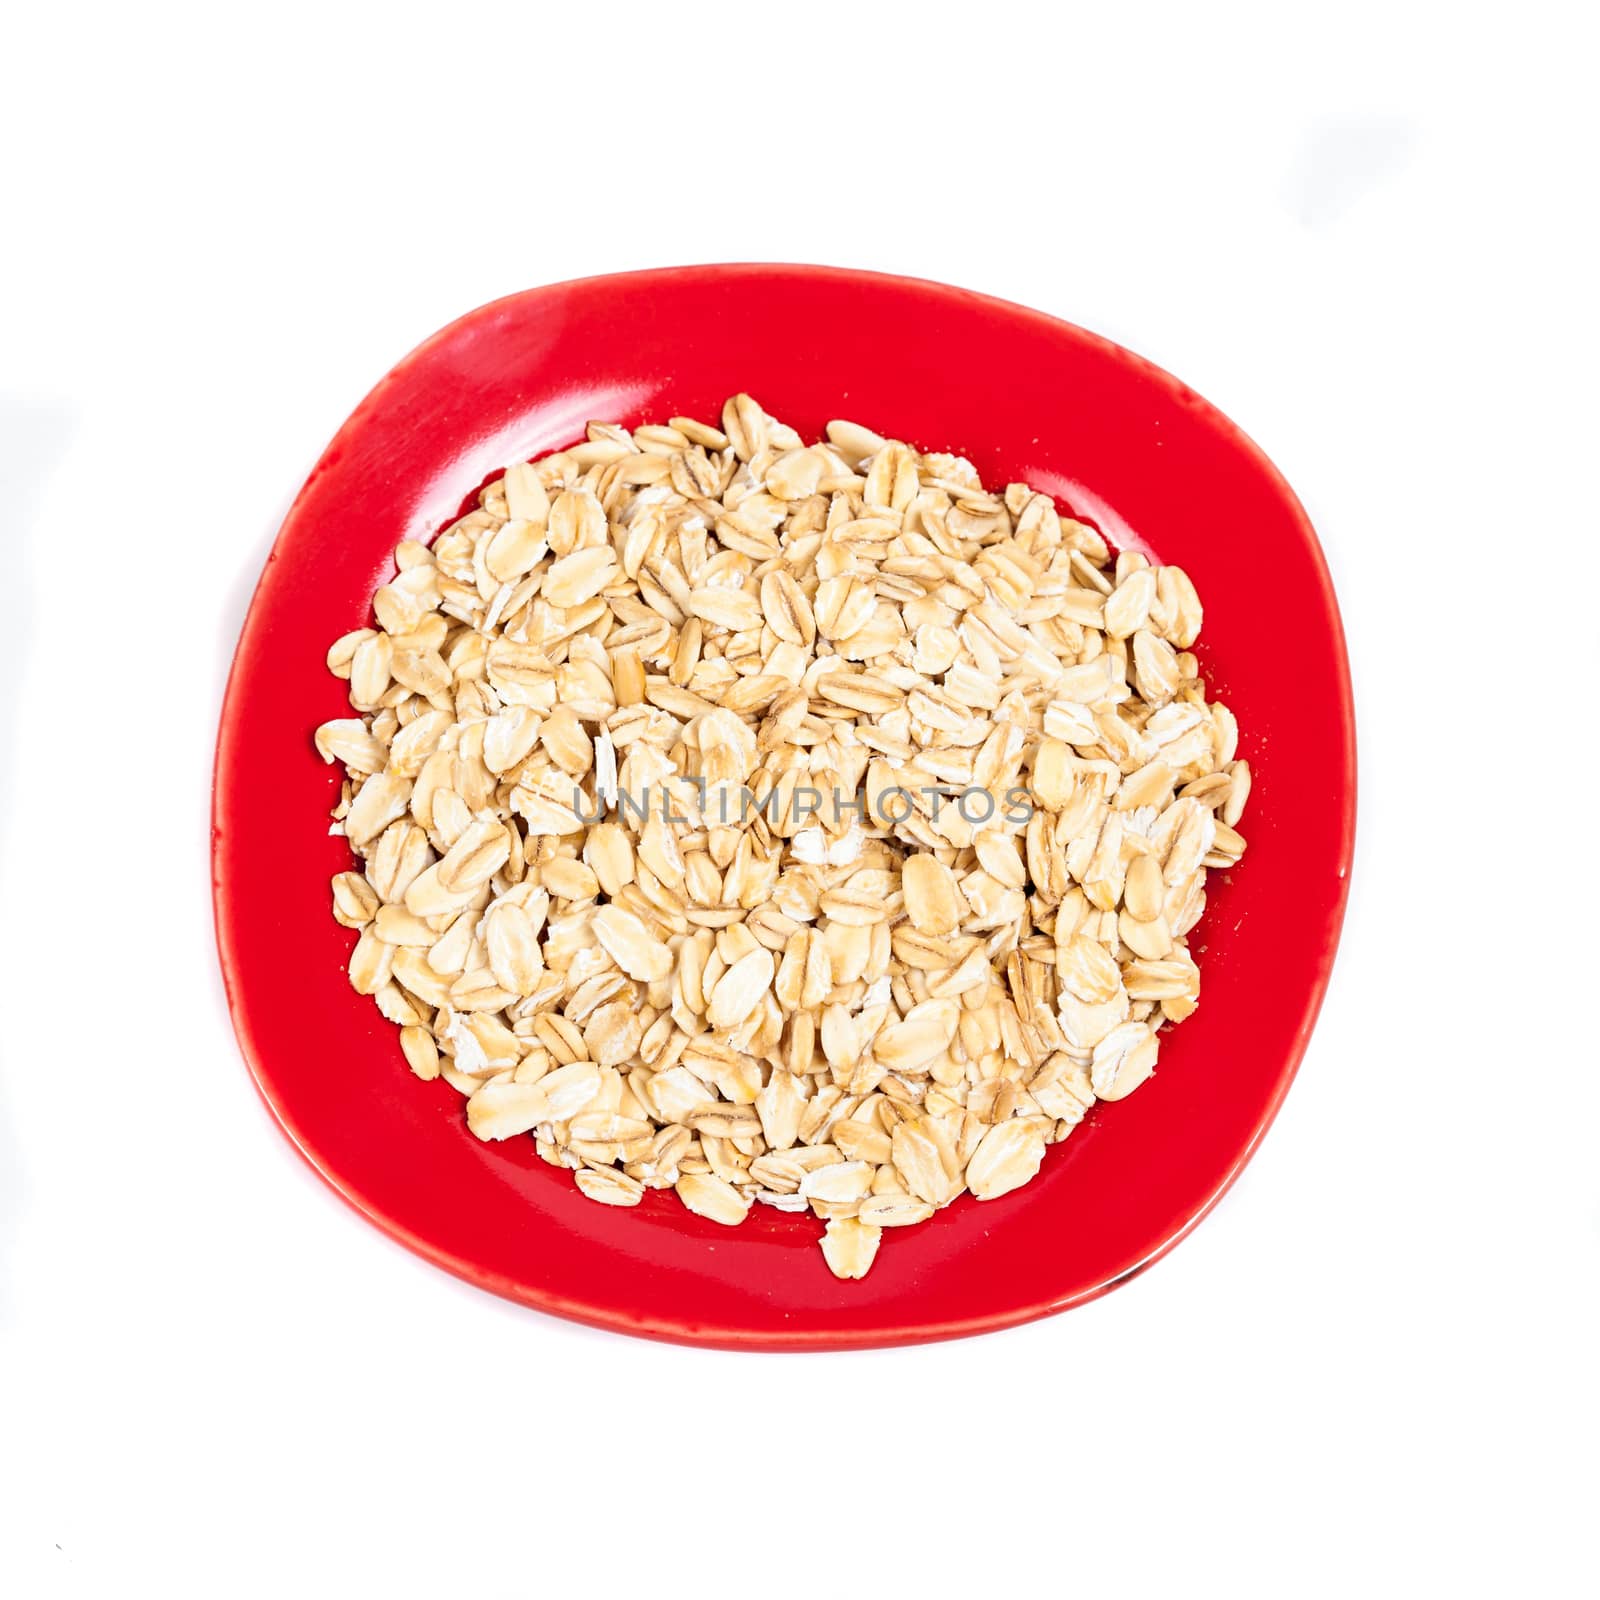 red dish  with oats flakes pile on white background. by amnarj2006